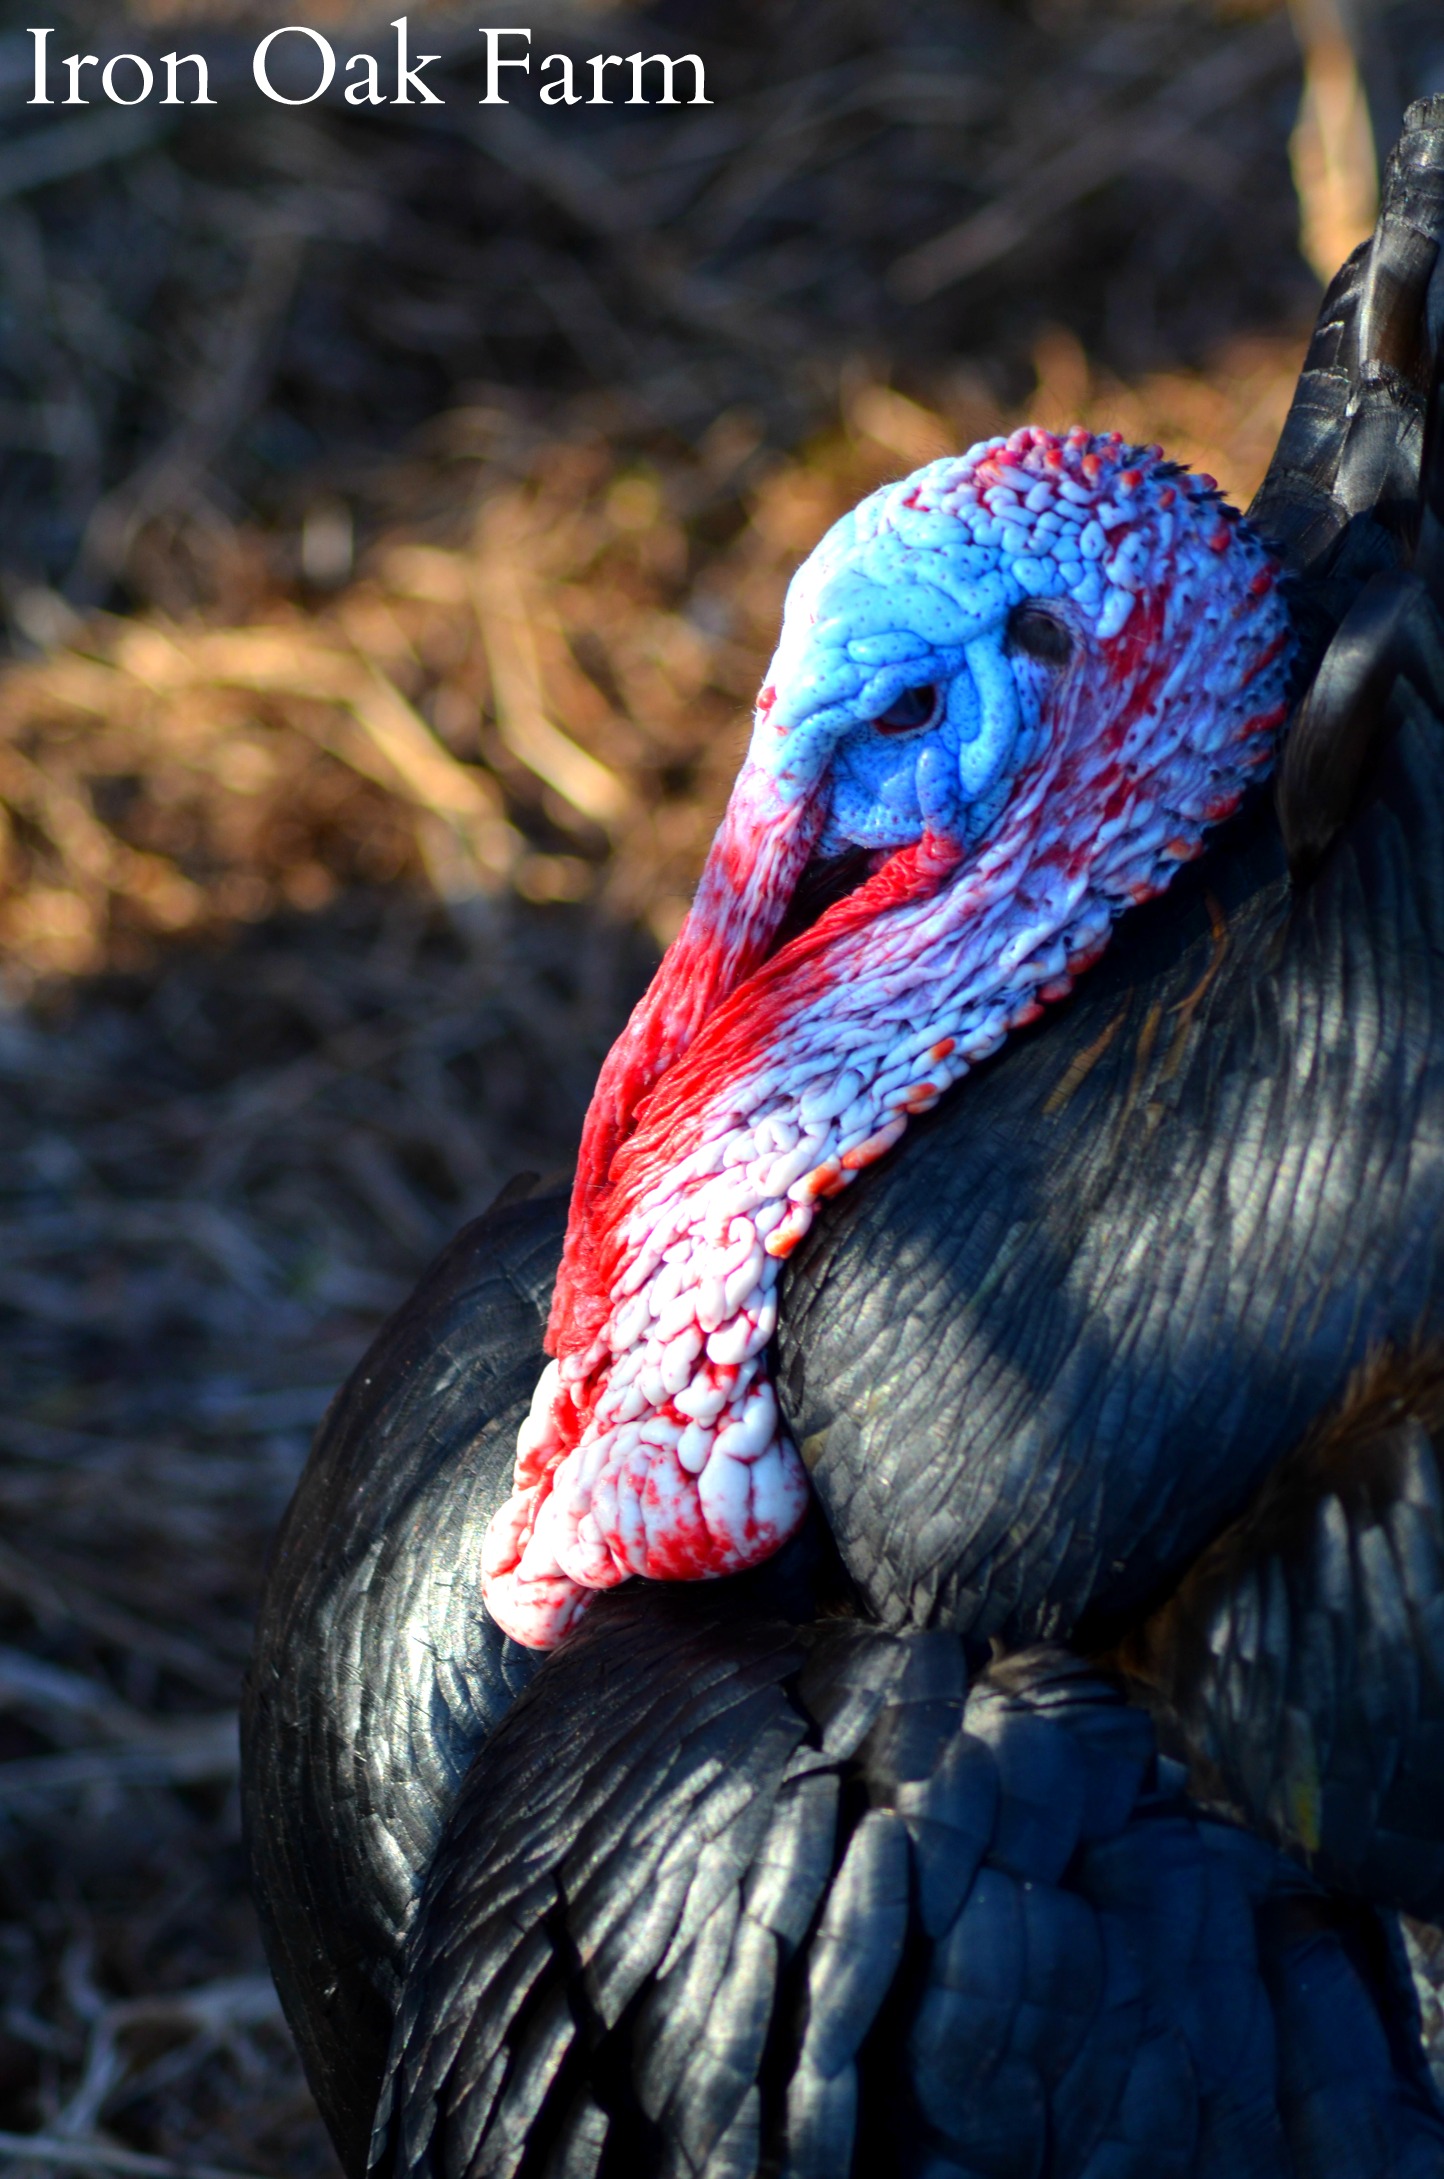 Pros, Cons and Facts about Raising Turkeys